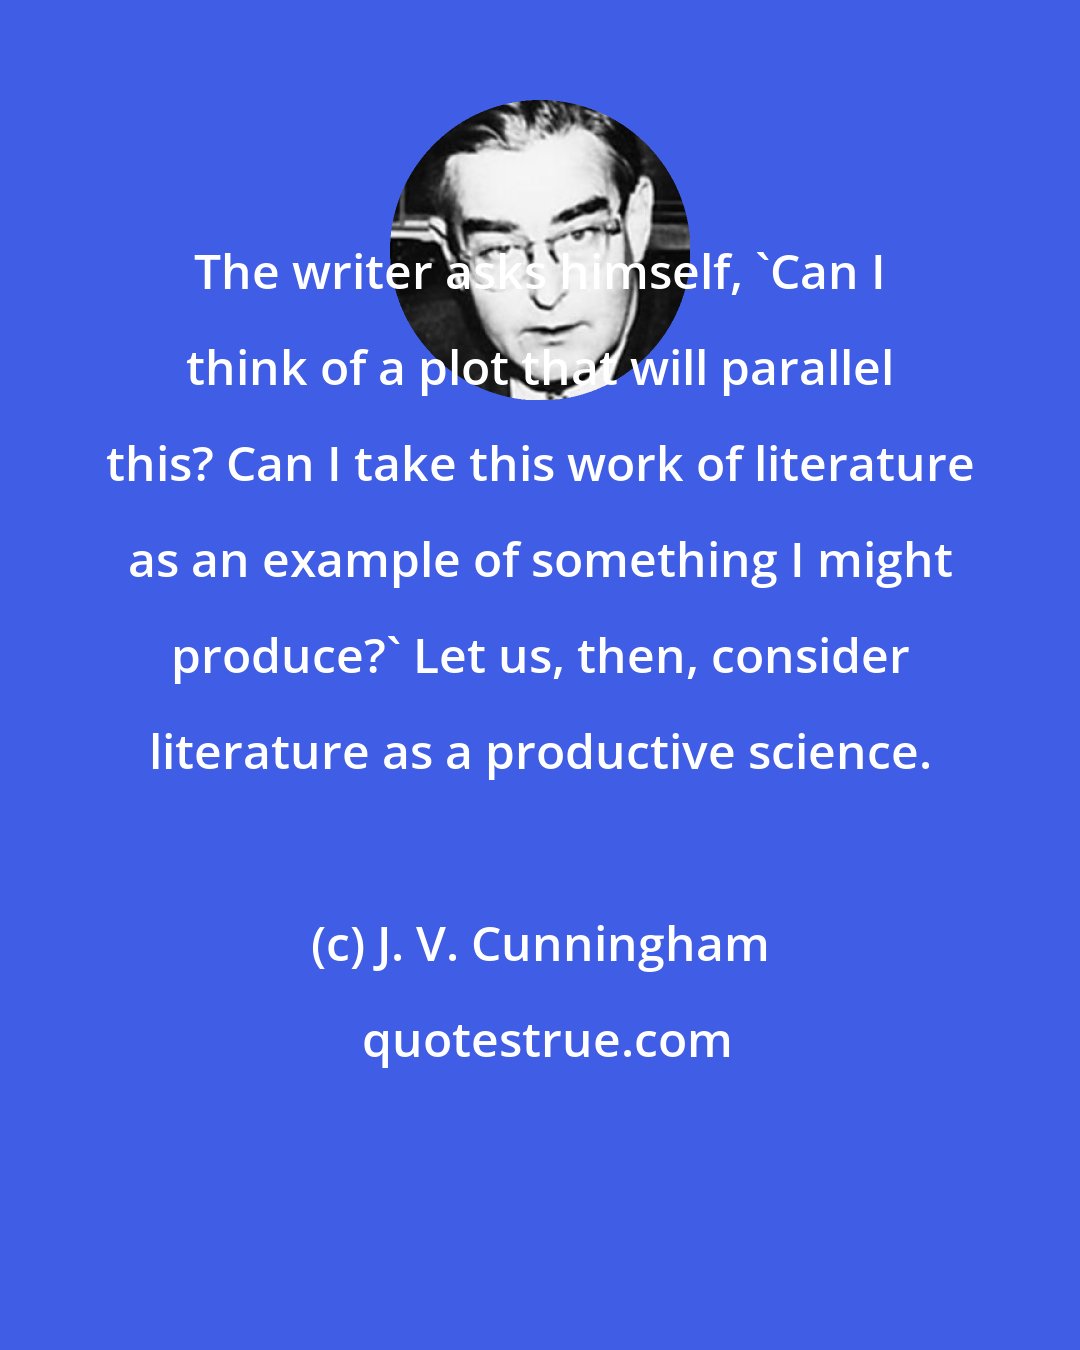 J. V. Cunningham: The writer asks himself, 'Can I think of a plot that will parallel this? Can I take this work of literature as an example of something I might produce?' Let us, then, consider literature as a productive science.